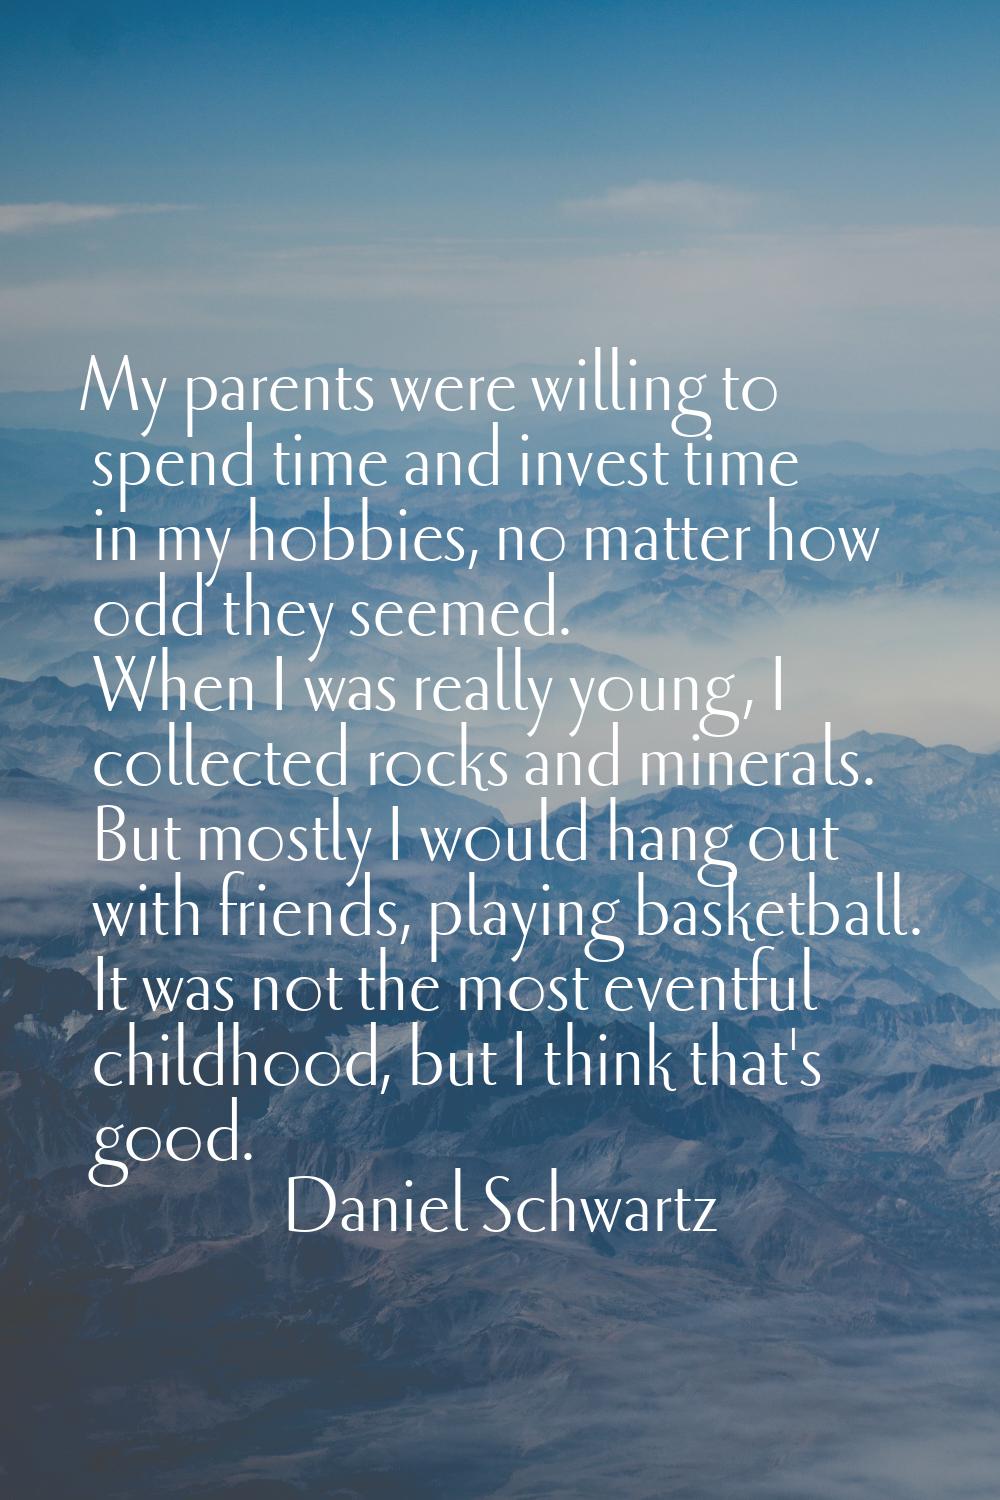 My parents were willing to spend time and invest time in my hobbies, no matter how odd they seemed.